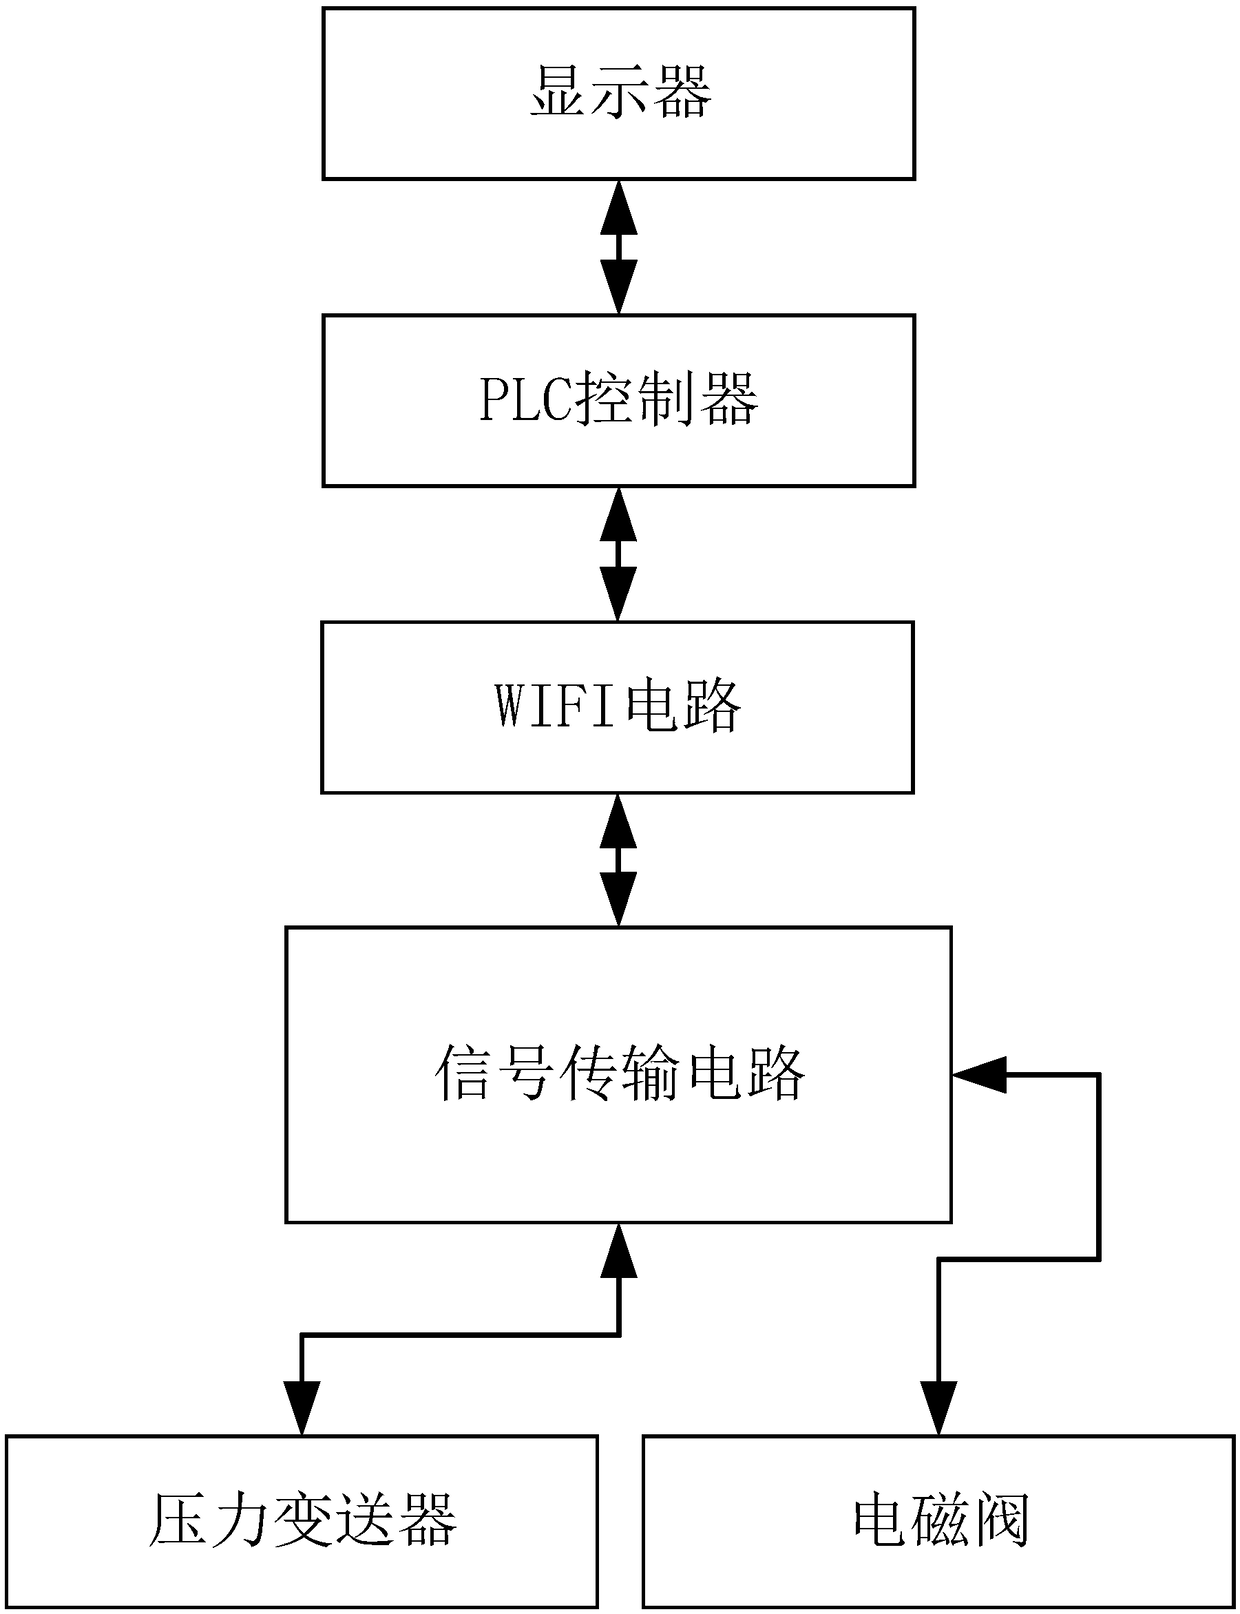 Inspection device and working method of inspection device for automobile tire pressure monitoring system and new energy automobile